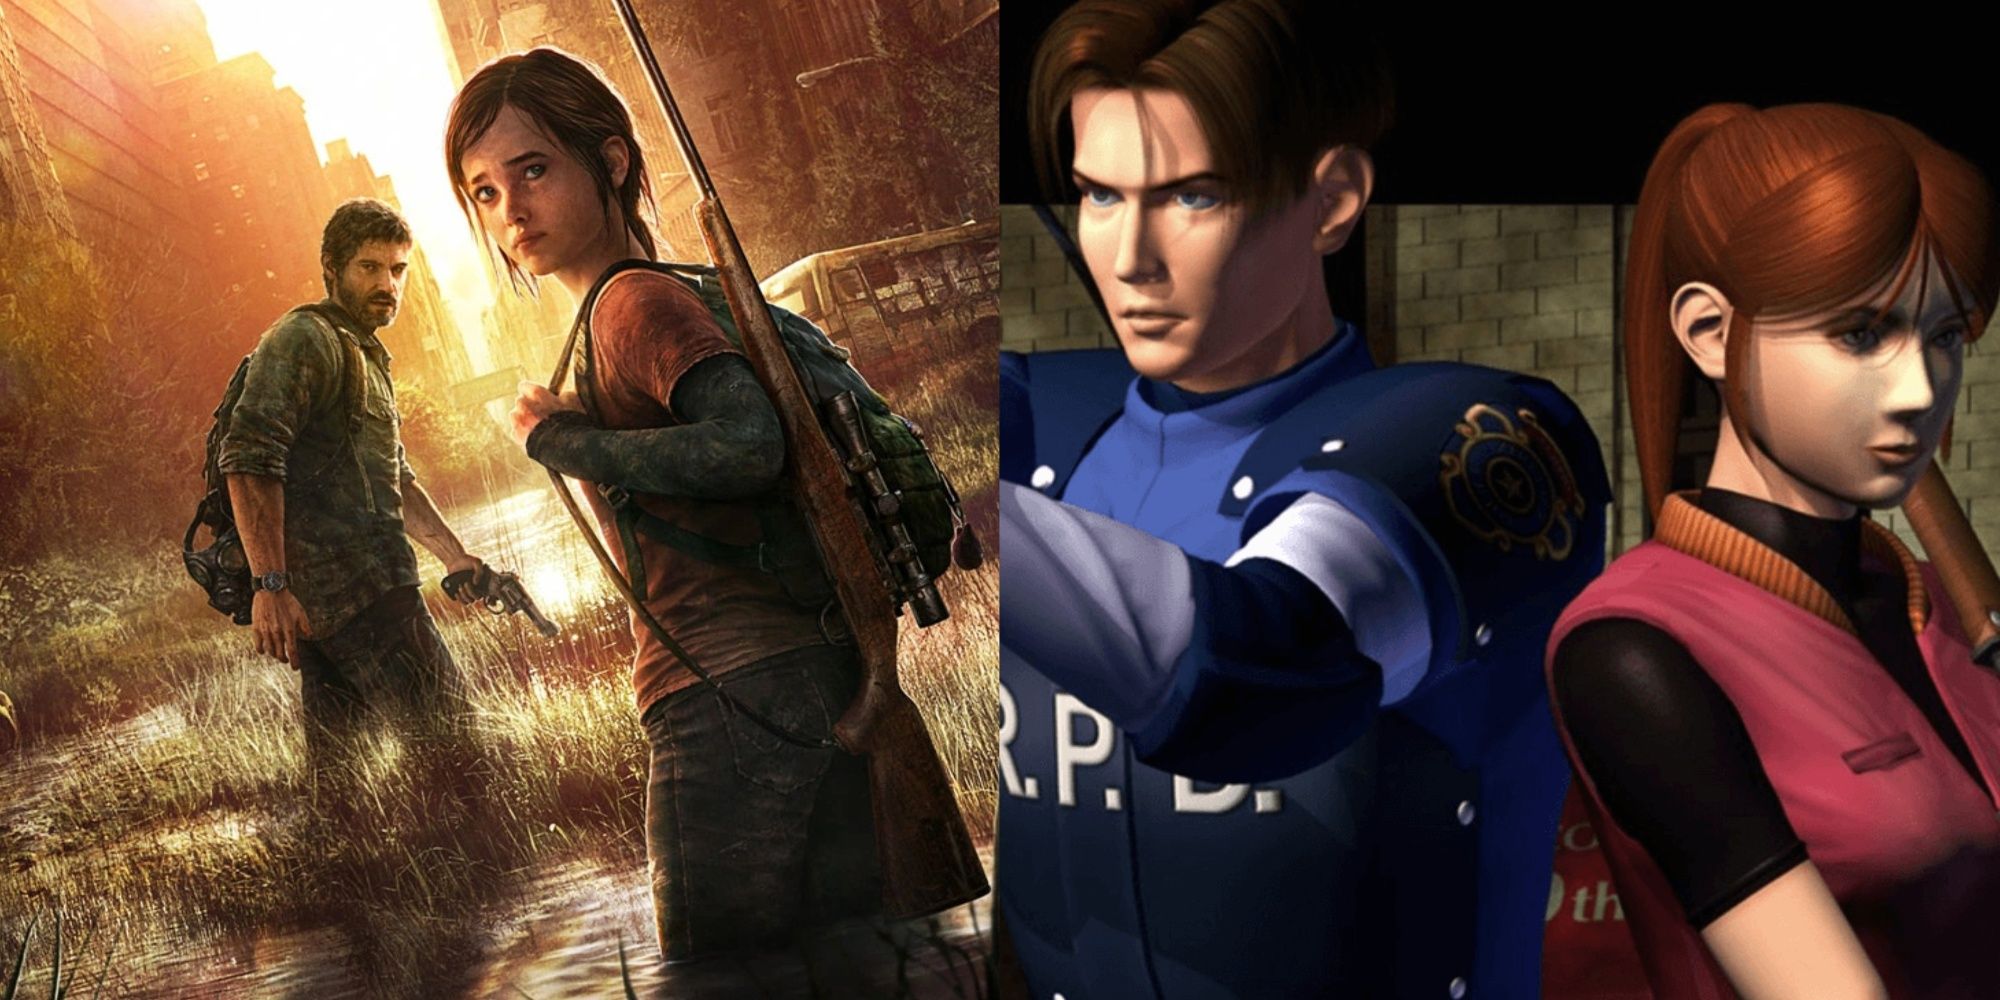 Cover art for the original release of The Last of Us and key art from Resident Evil 2 Classic.